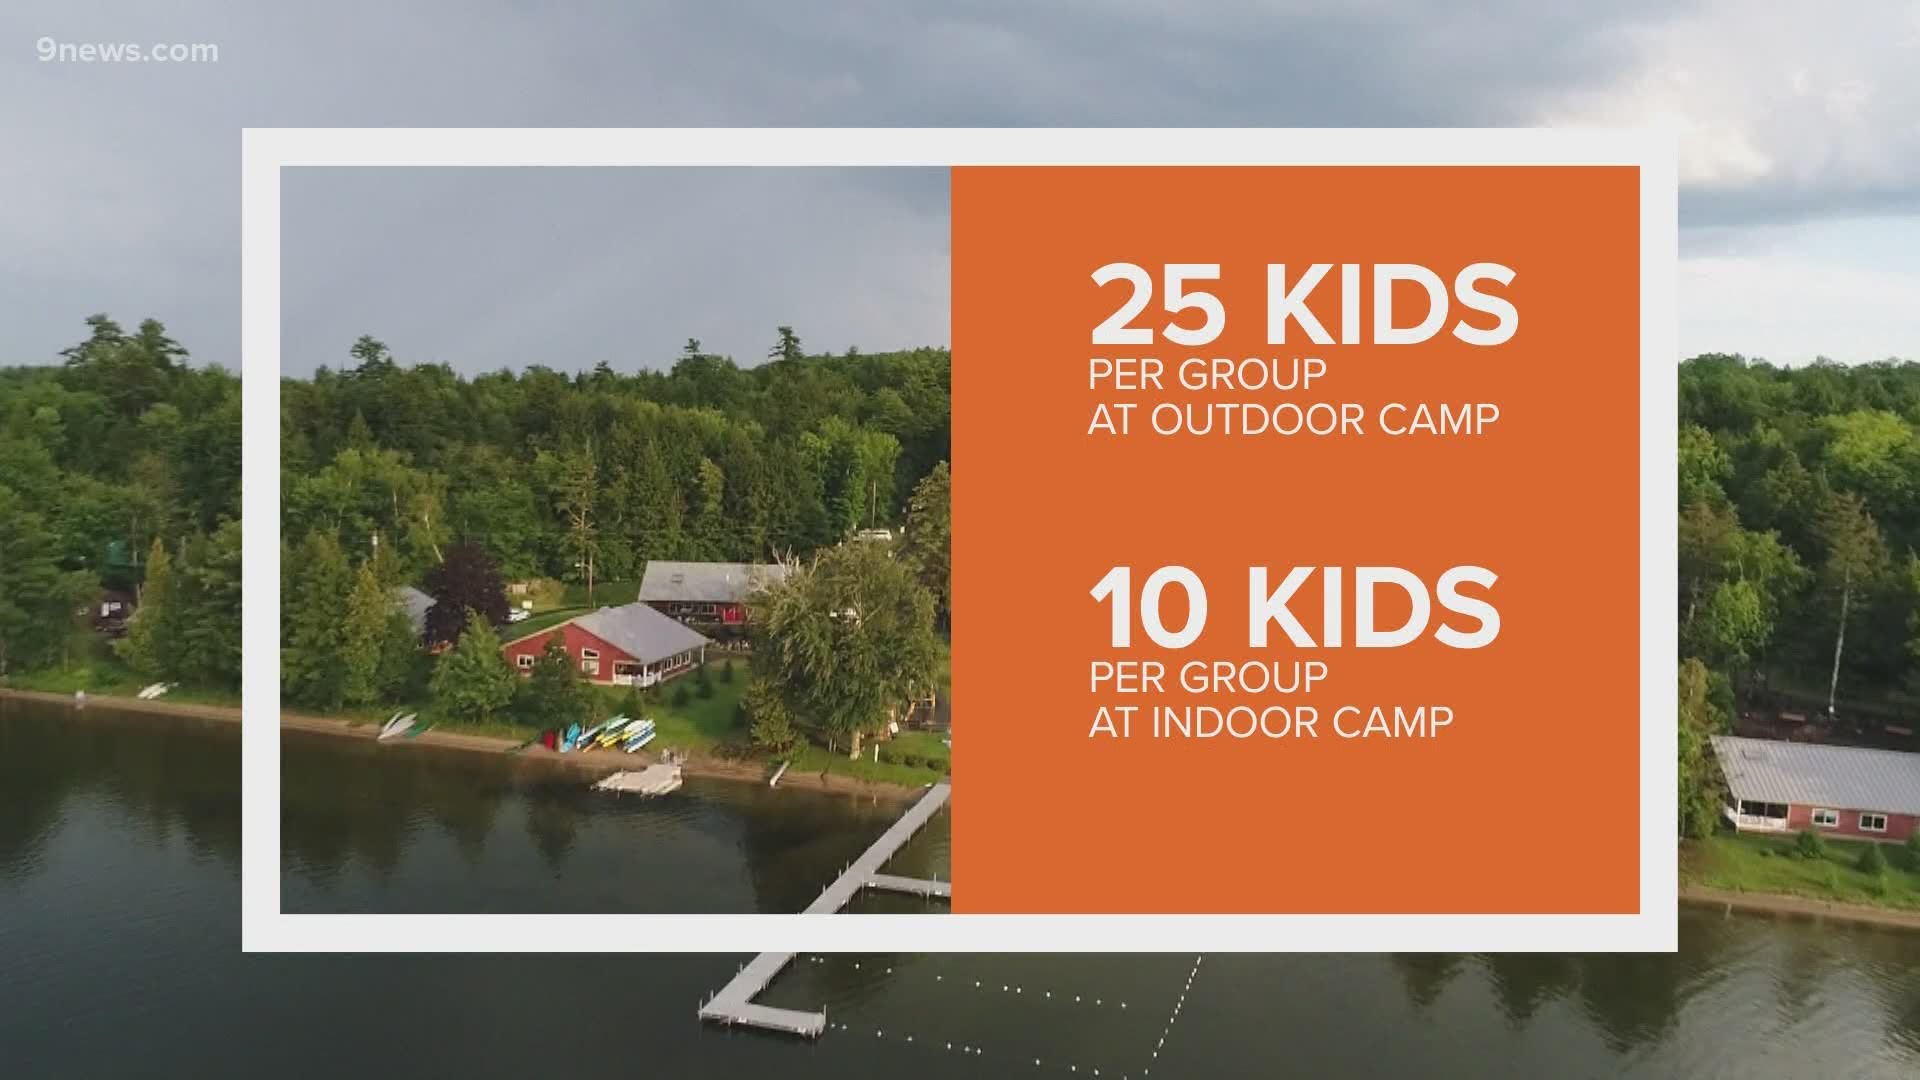 In this week's It take a village segment we're looking at how the coronavirus has impacted summer camps.